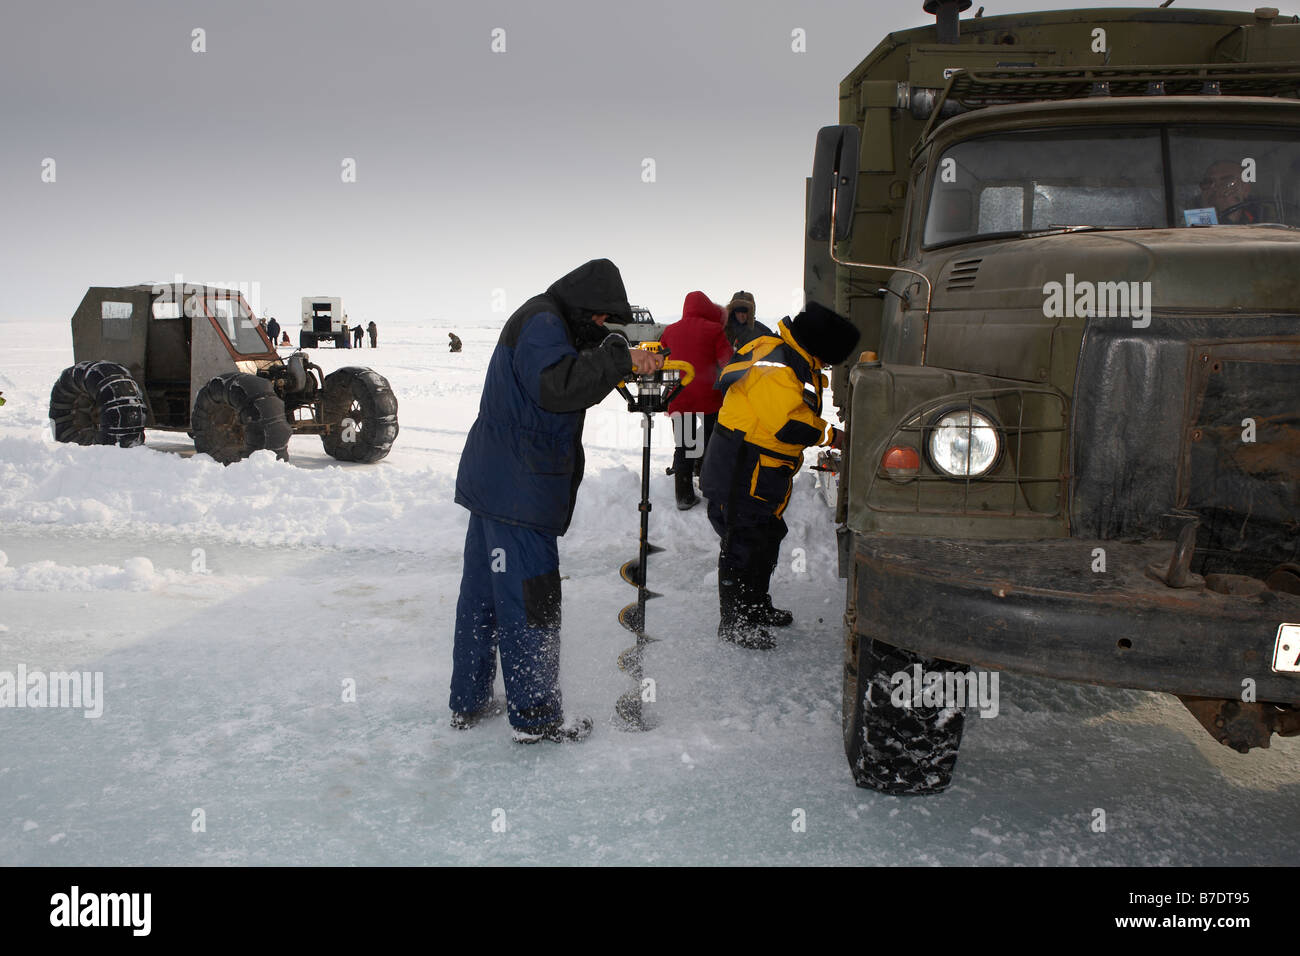 Drilling hole for Ice fishing, Anadyr Chukotka, Siberia Russia Stock Photo